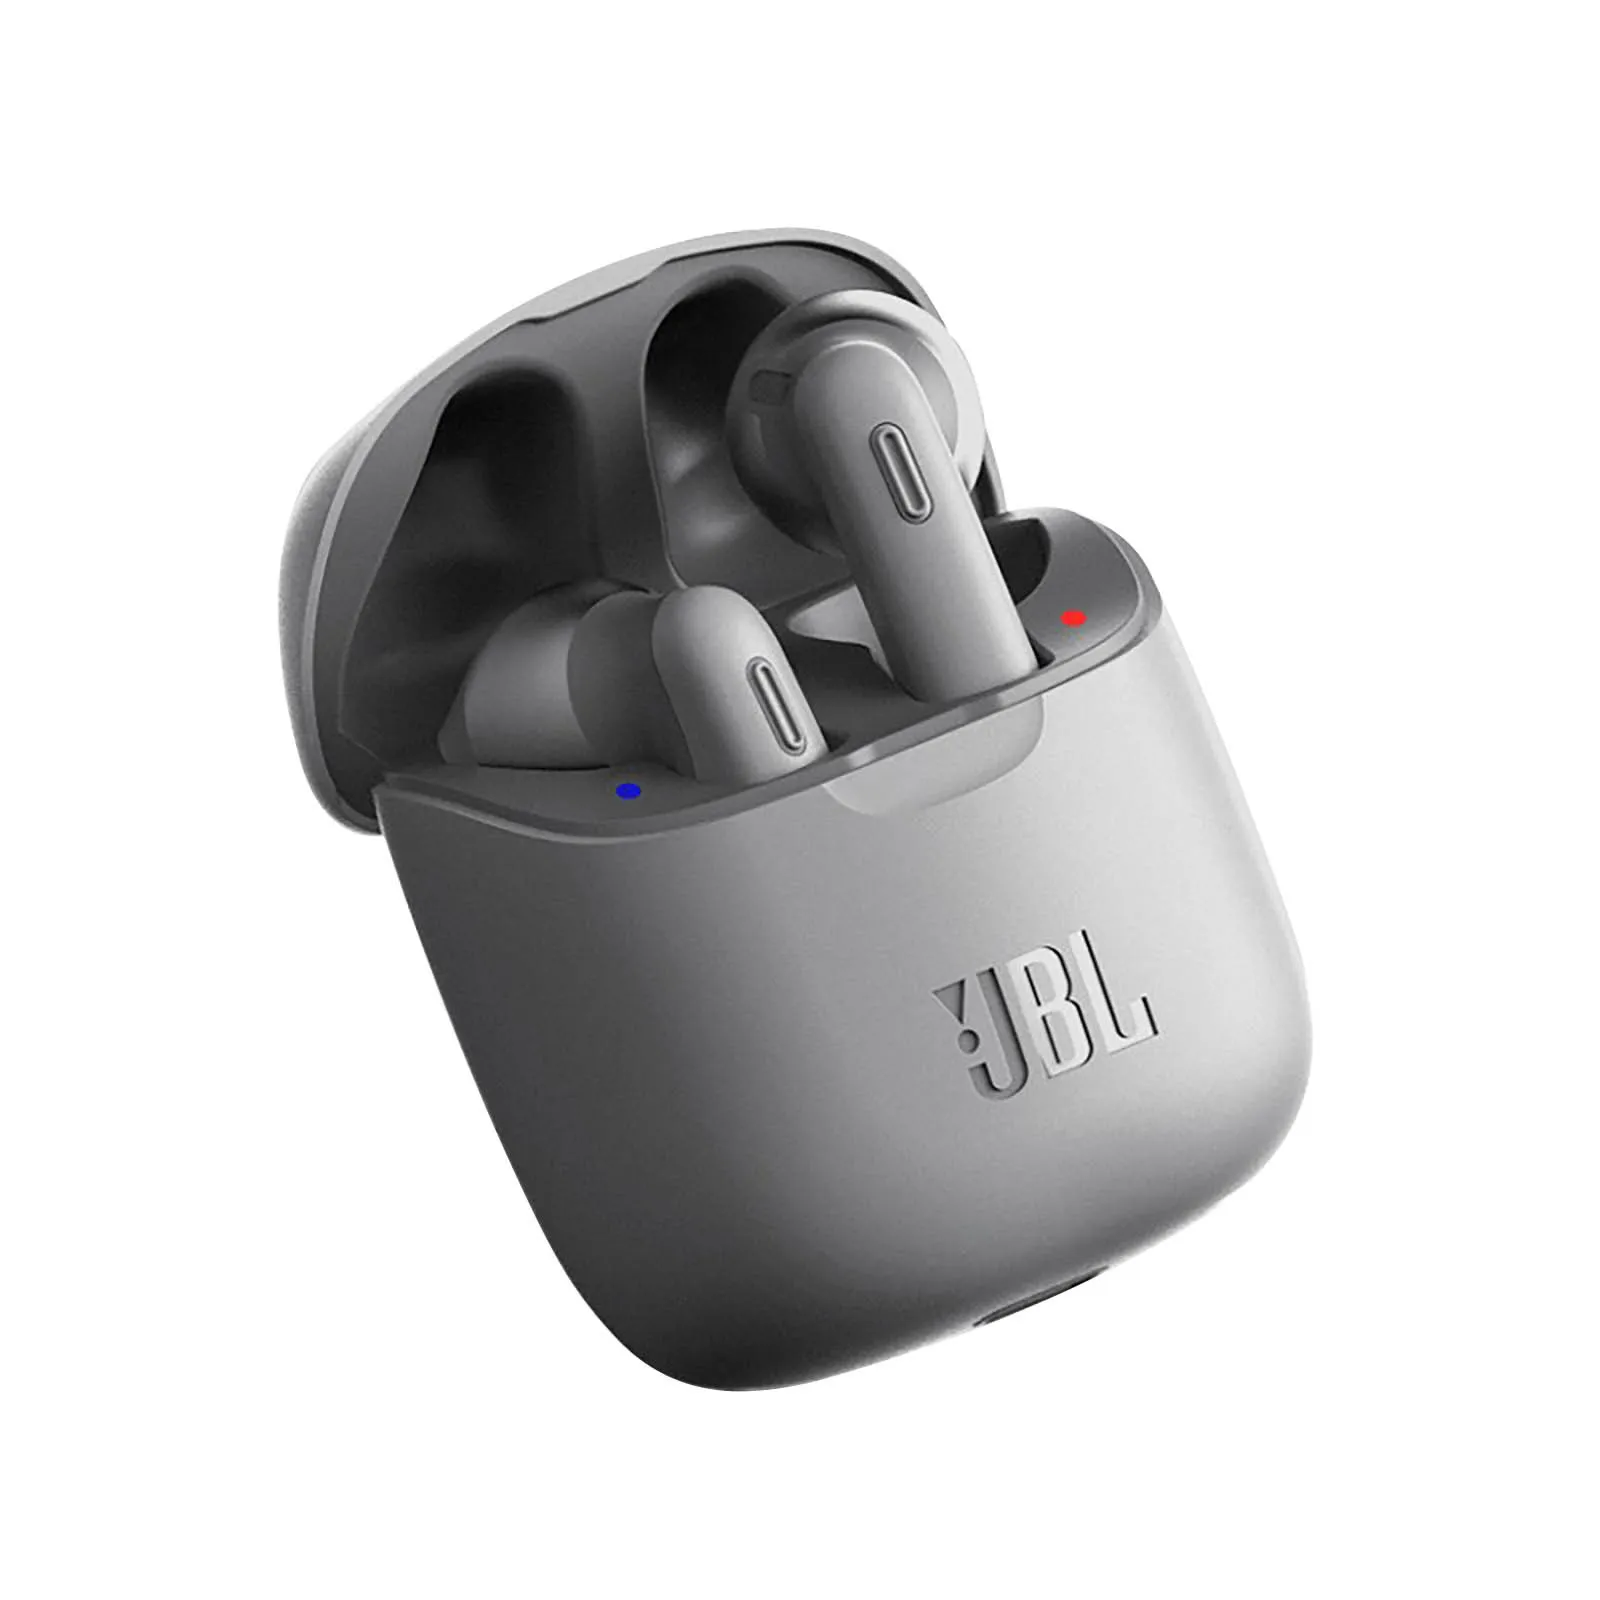 

Original For JBL Tune 225 TWS Wireless Bluetooth Earphones Stereo Earbuds Bass Sound Headphones Noise Reduction Headset With Mic